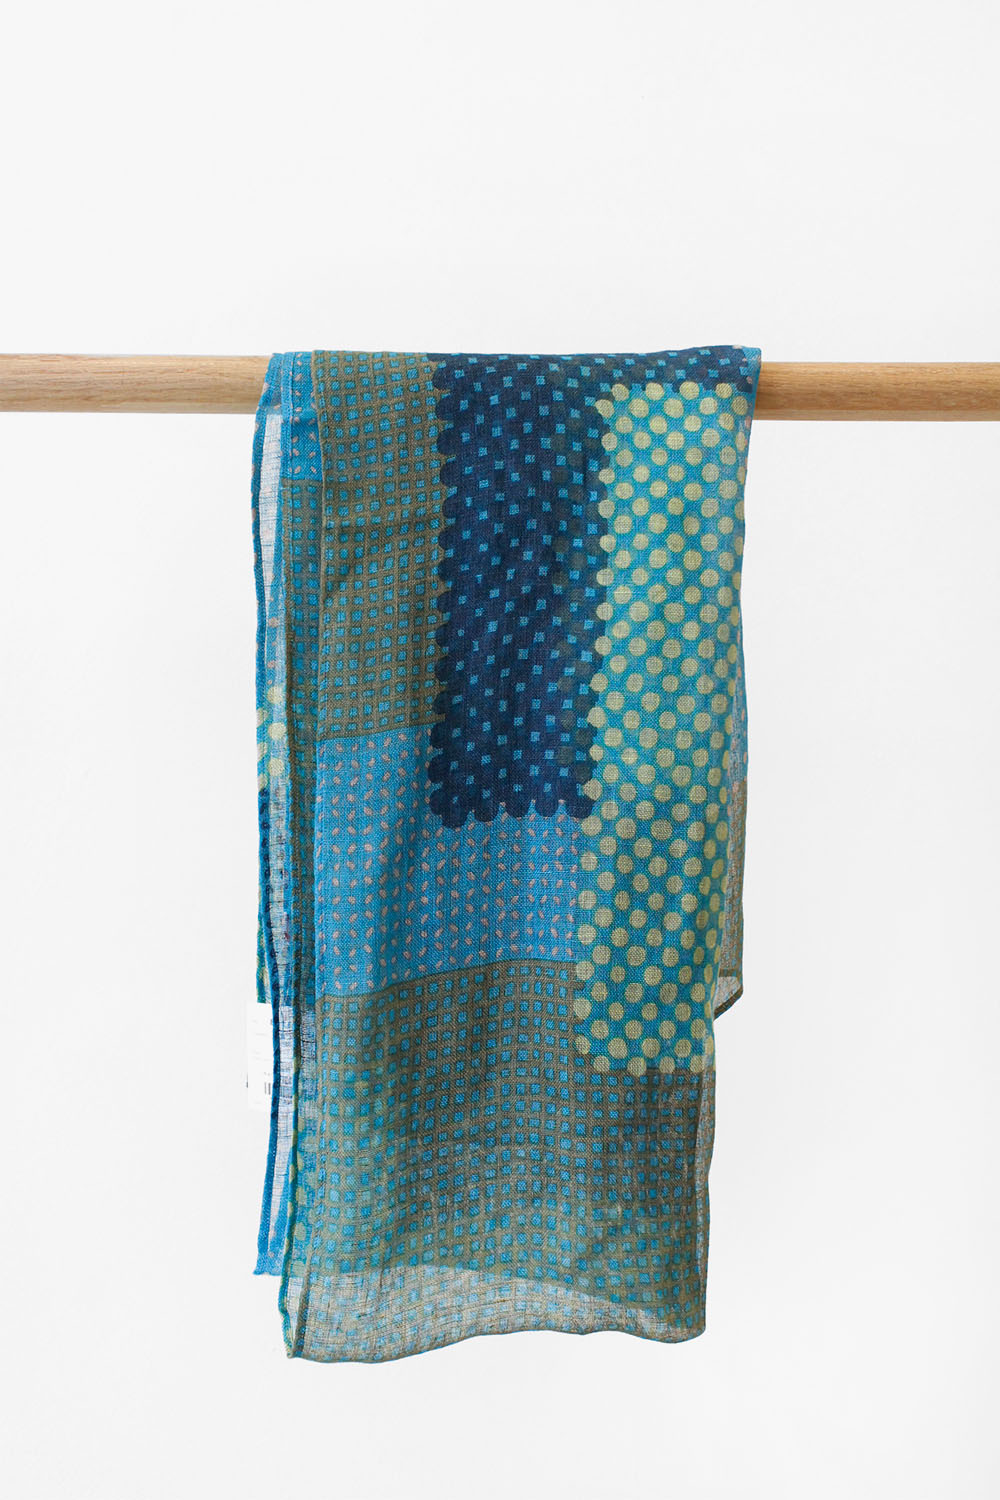 IN & OUT Scarf Blue